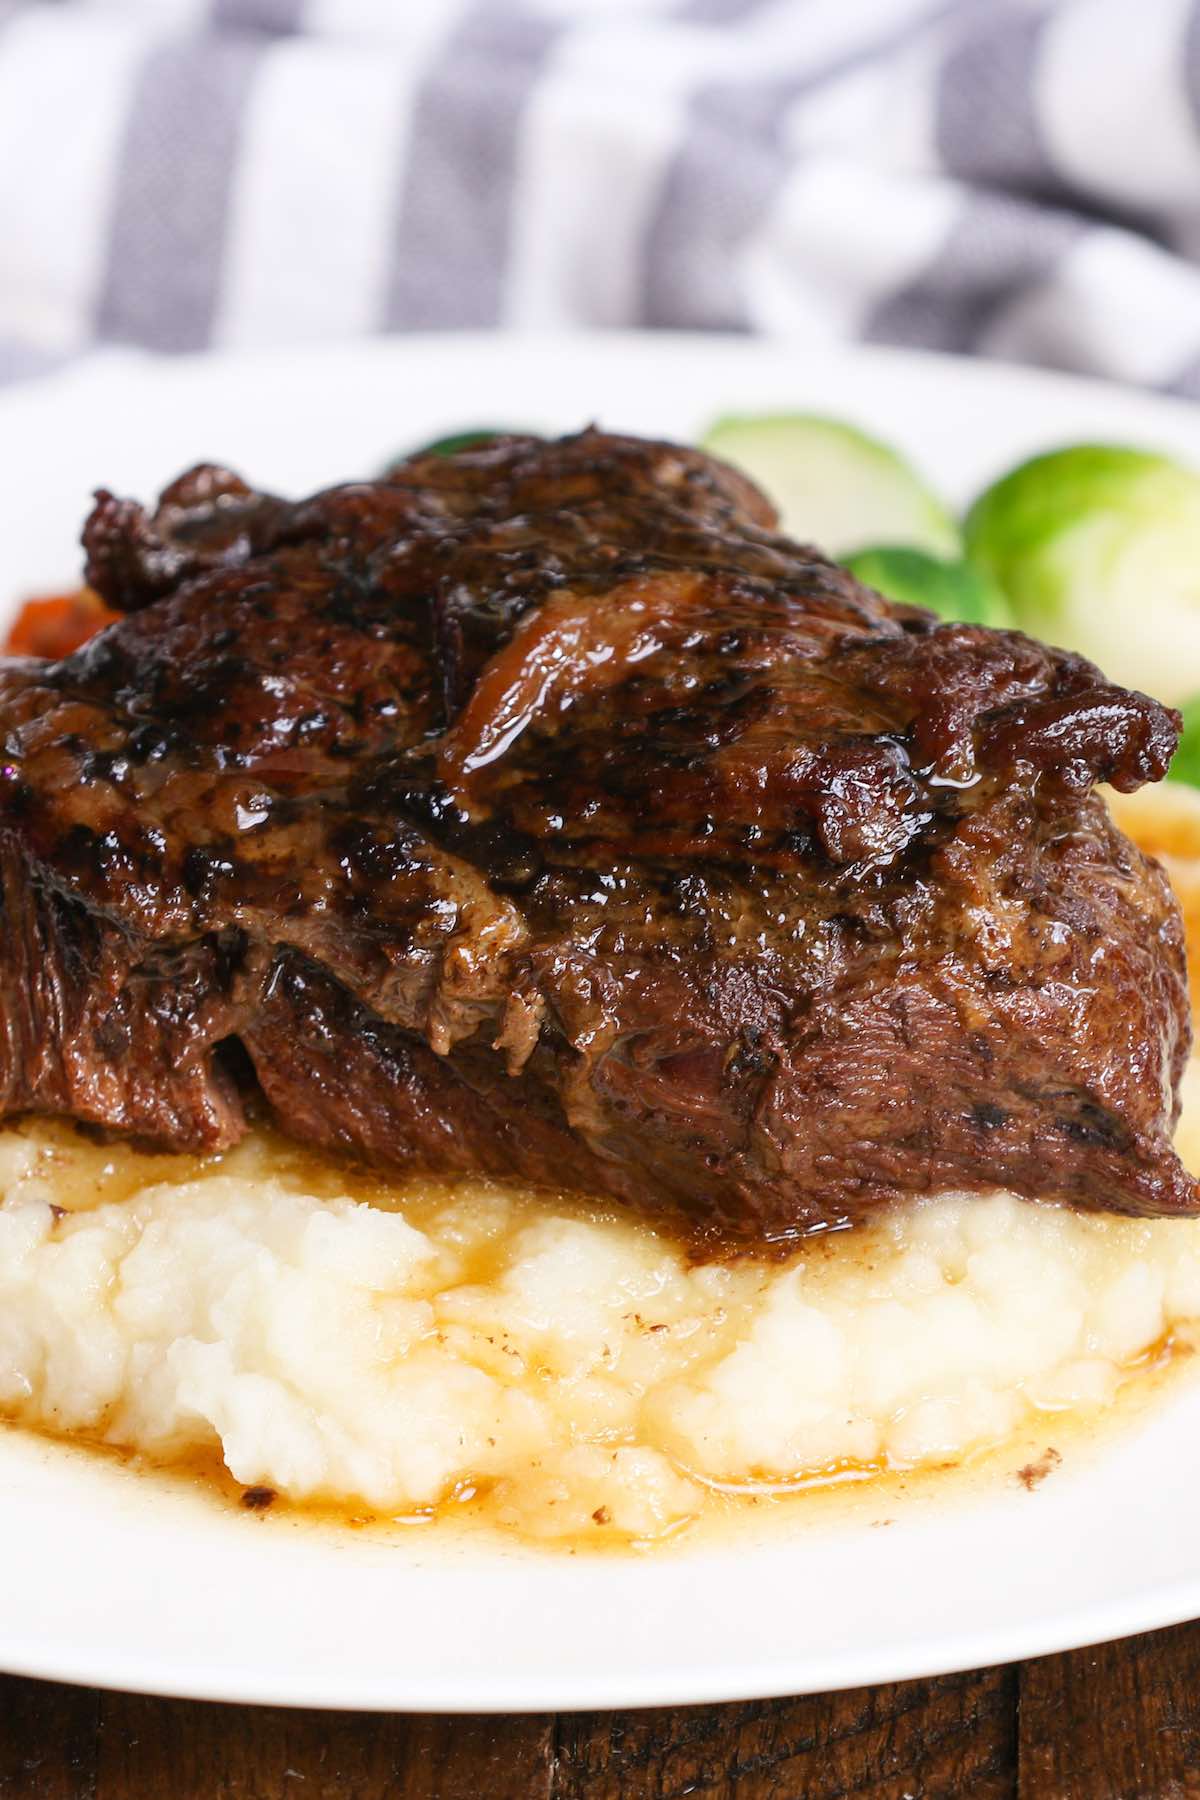 Braised beef on a bed of mashed potatoes with Brussel sprouts